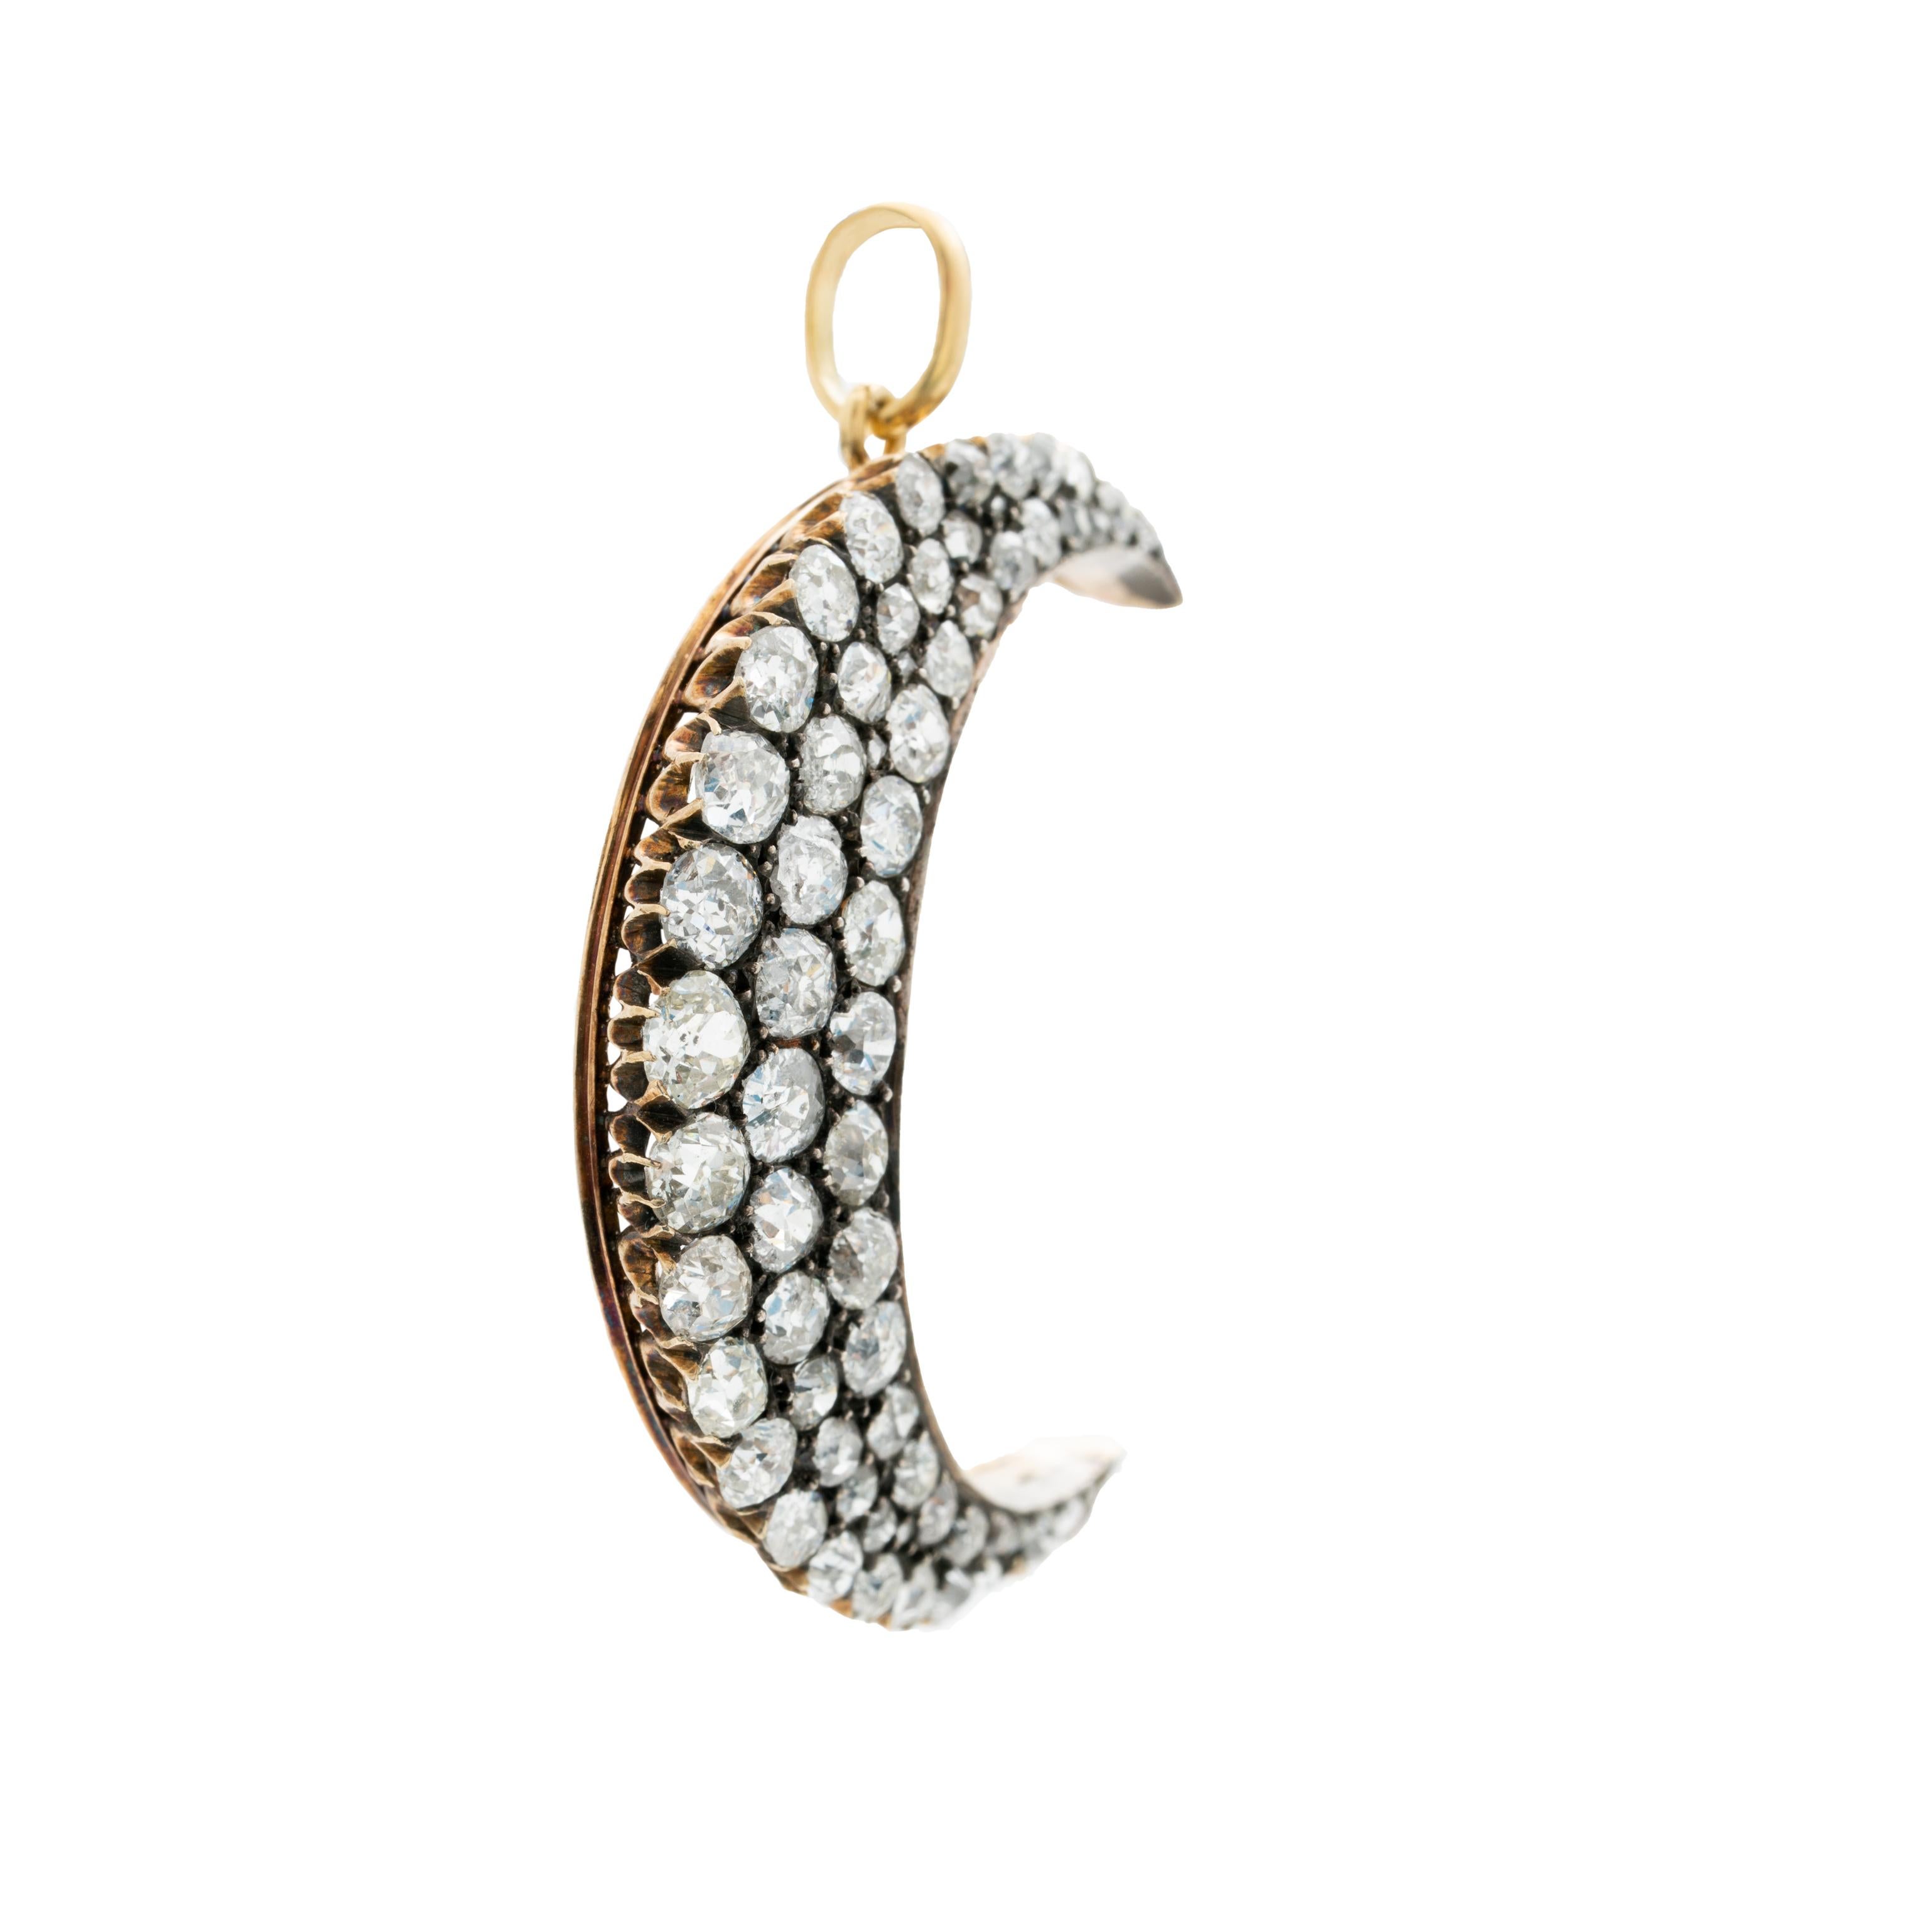 VICTORIAN 18K YELLOW GOLD, SILVER AND 7.25CTS. DIAMOND CRESCENT MOON c.1860s

Period: Victorian
Year: 1860s
Material: Gold, Silver, 7.25cts. Old Mine Cut Diamonds
Weight: 7.77g
Length: 40.25mm/1.58 inches 
Width: 32.16mm/ 1.26 inches
Condition: